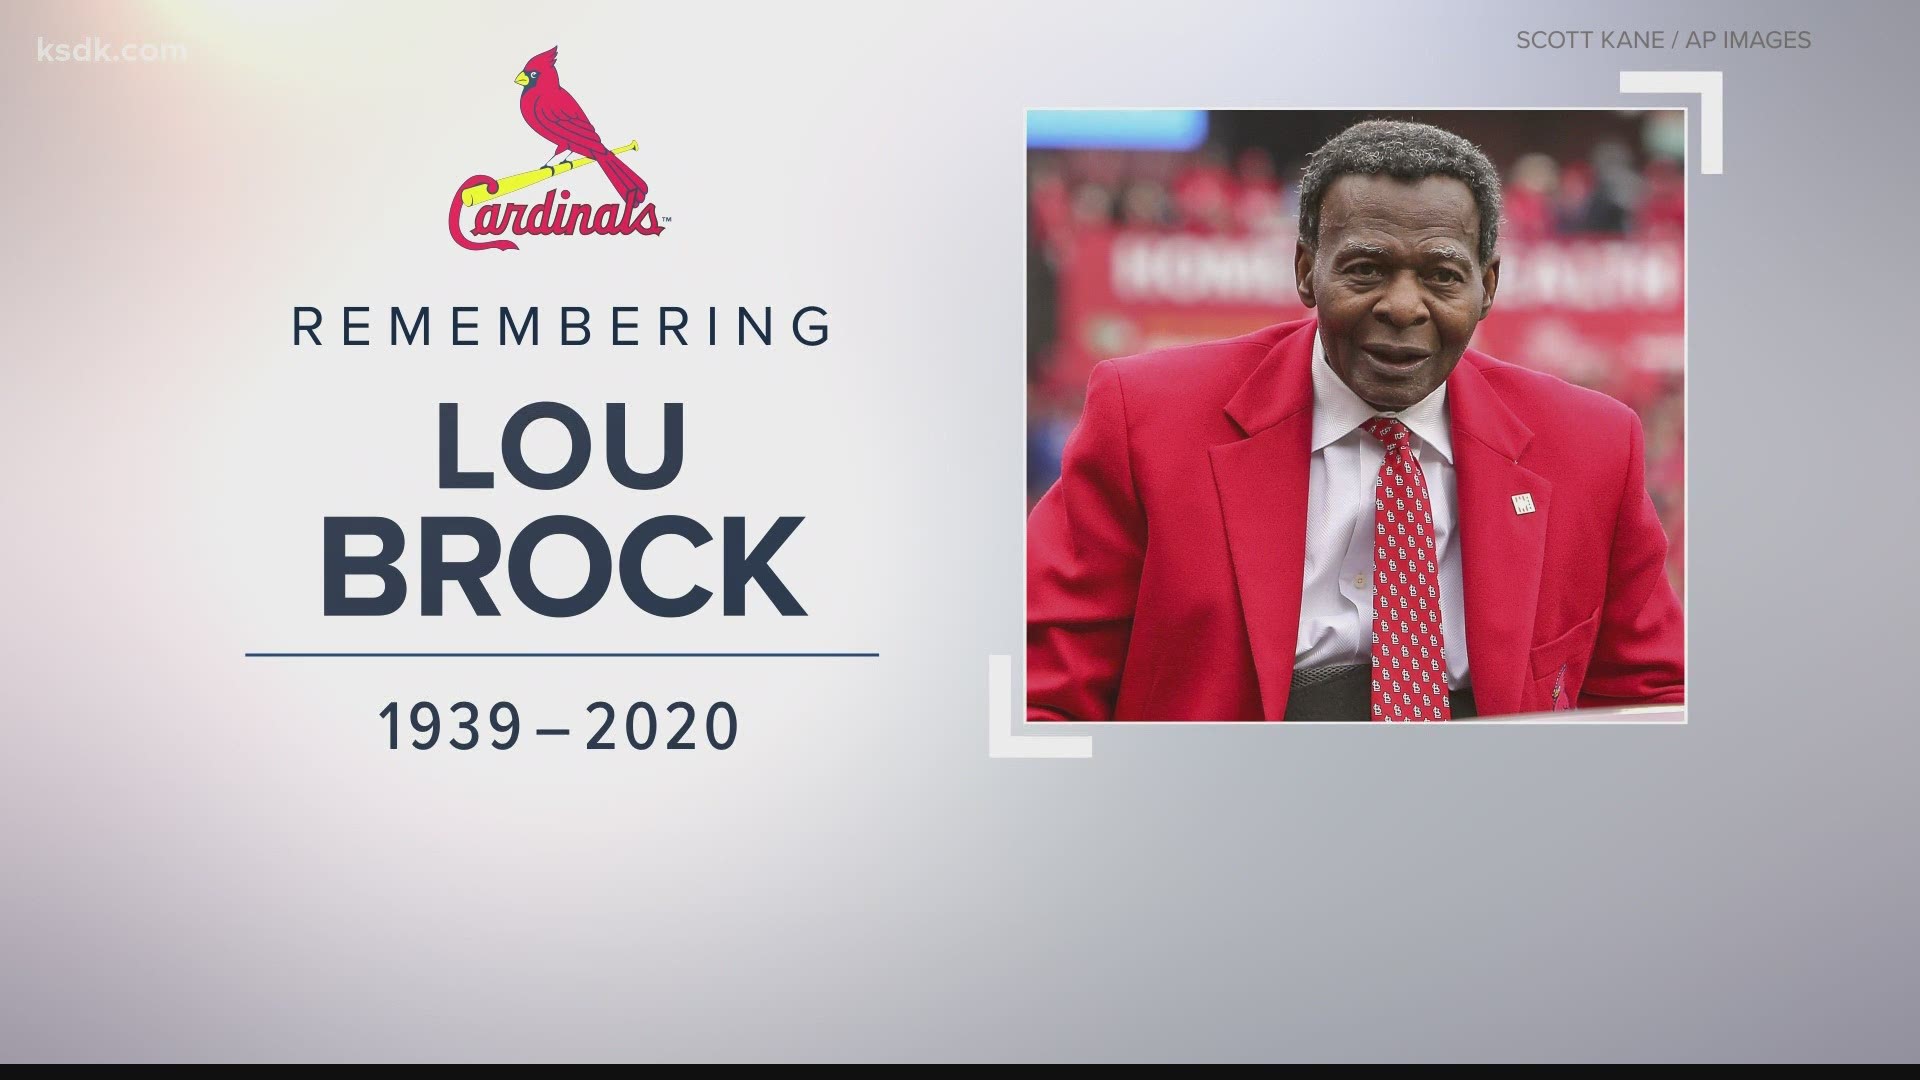 Brock had battled multiple medical conditions since retiring as the most prolific base stealer in the history of baseball after the 1979 season